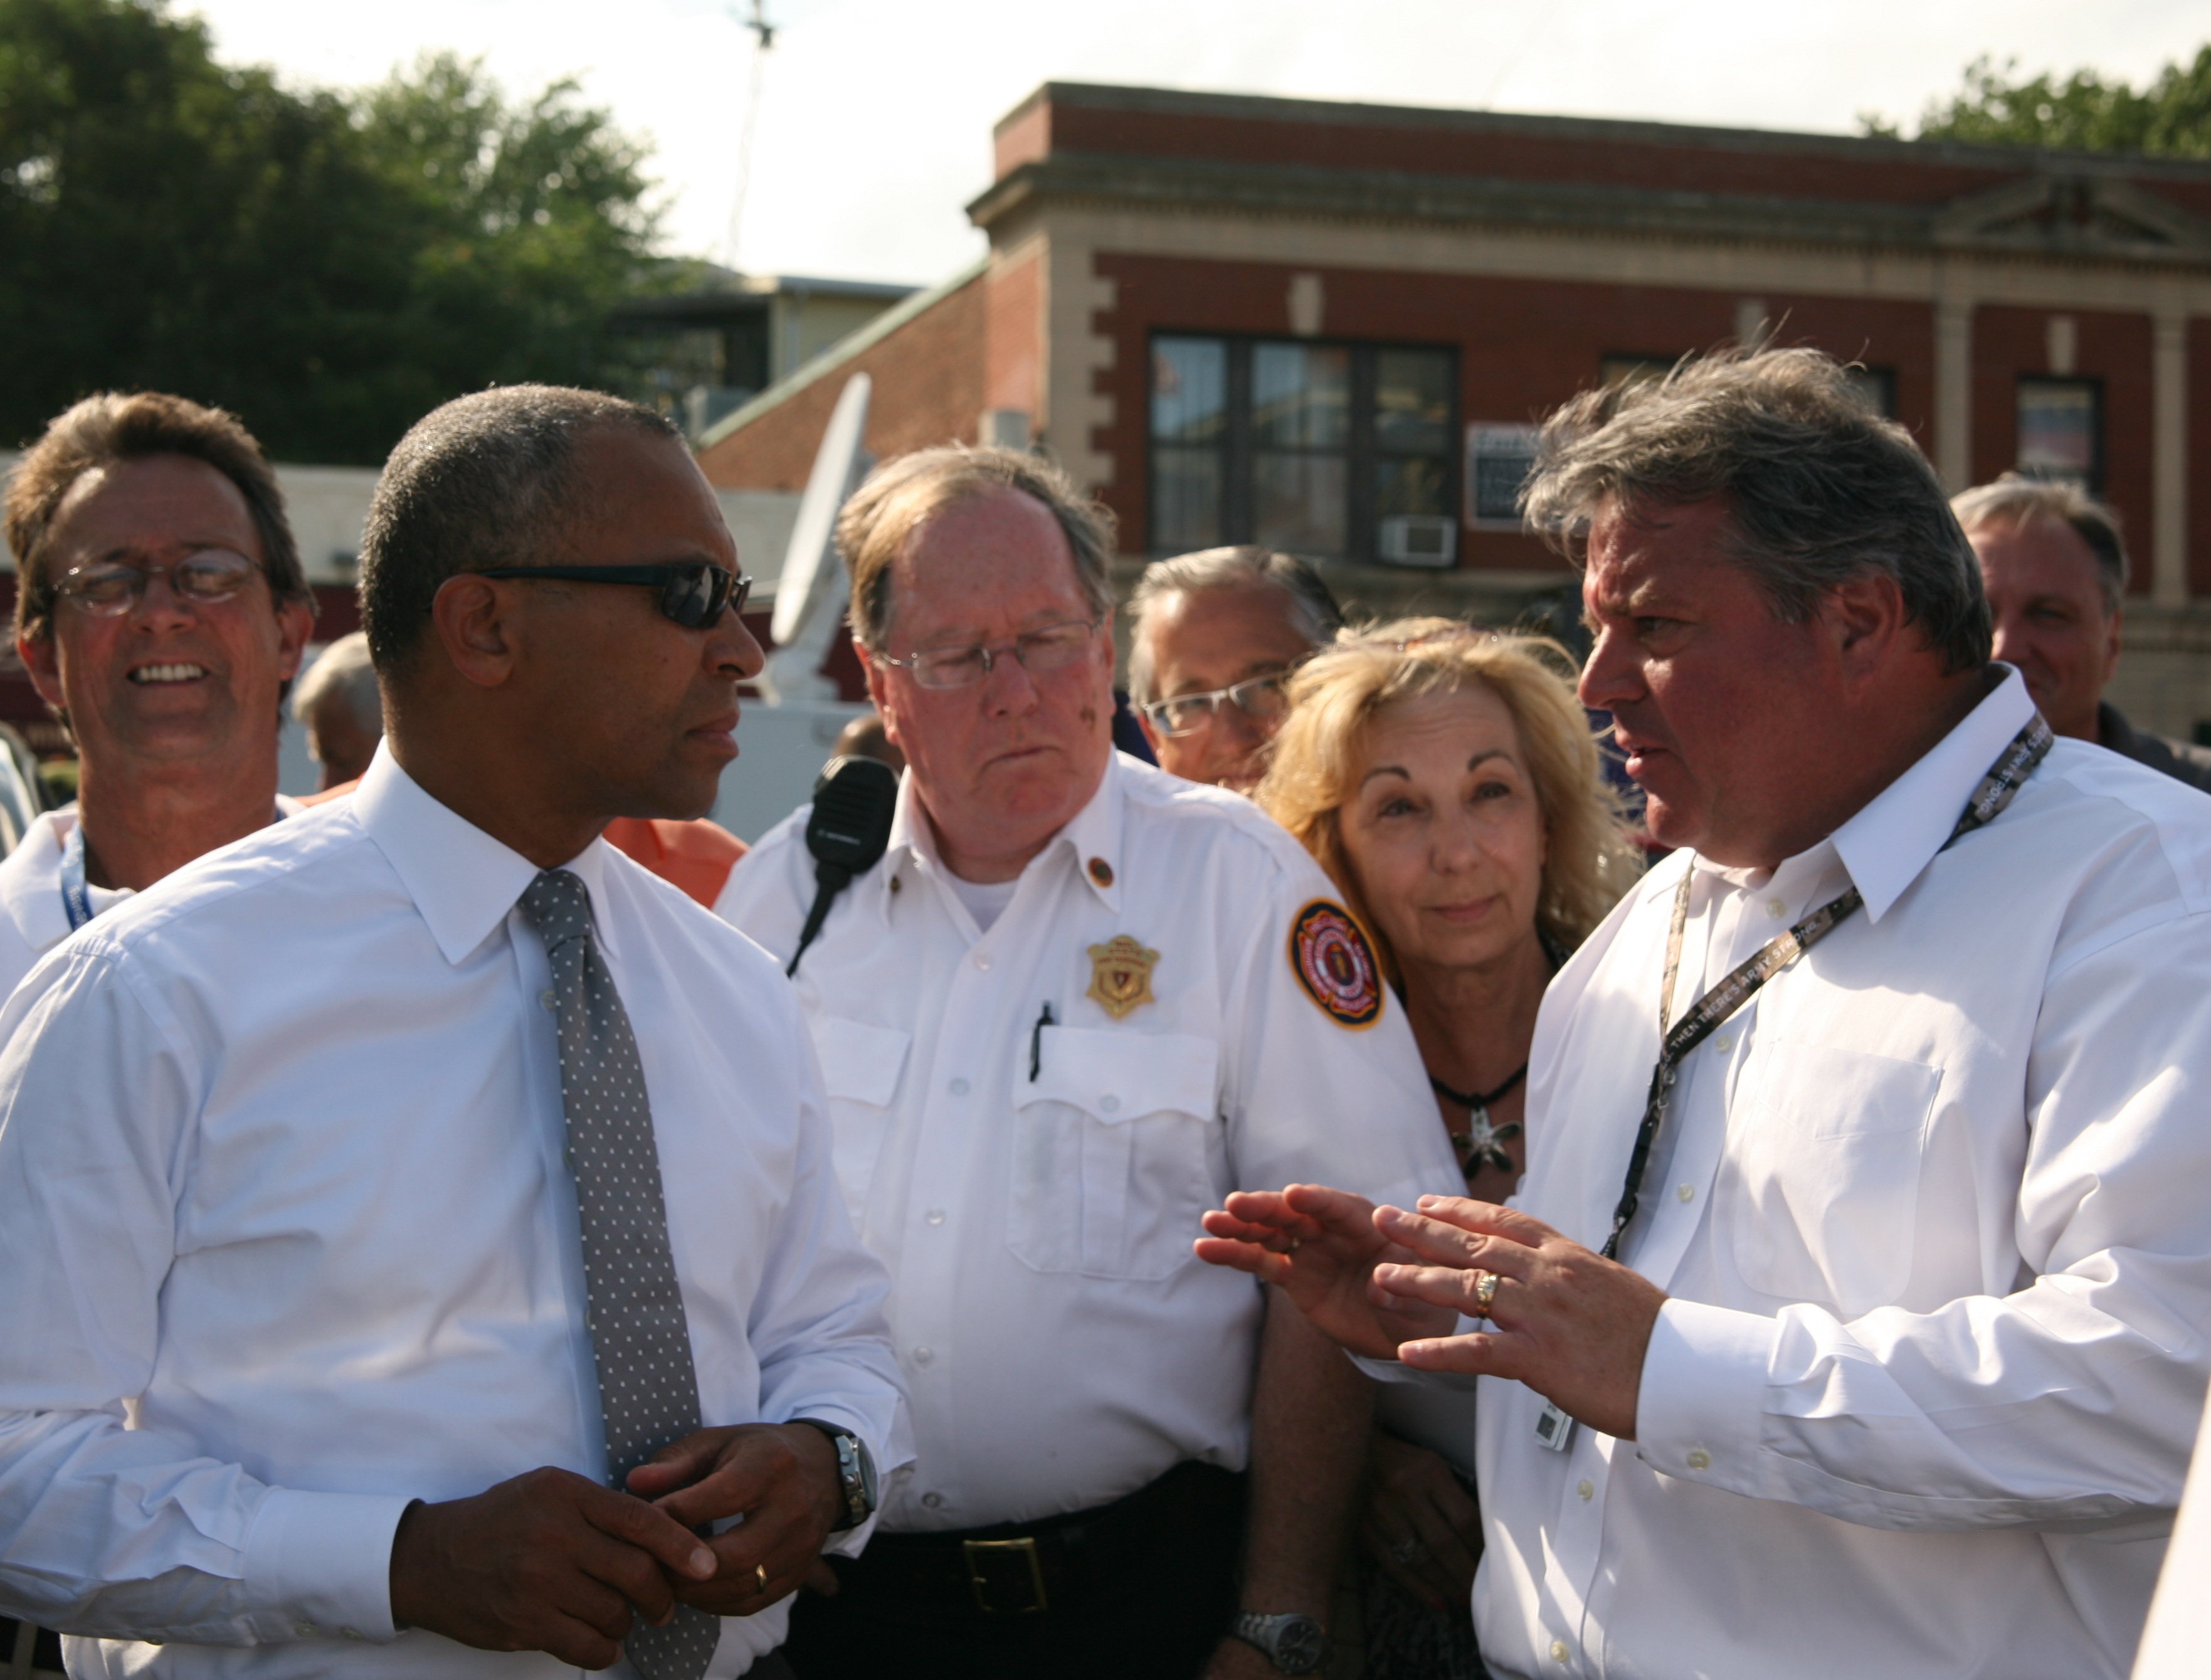 Mayor Dan Rizzo and Gov. Deval Patrick – along with other city and state officials (including State Fire Marshal Stephen Coan) – spoke about the disaster prior to a press conference late in the afternoon on Monday. The meeting took place on the American Legion Lawn as City Hall was not yet safe to enter.